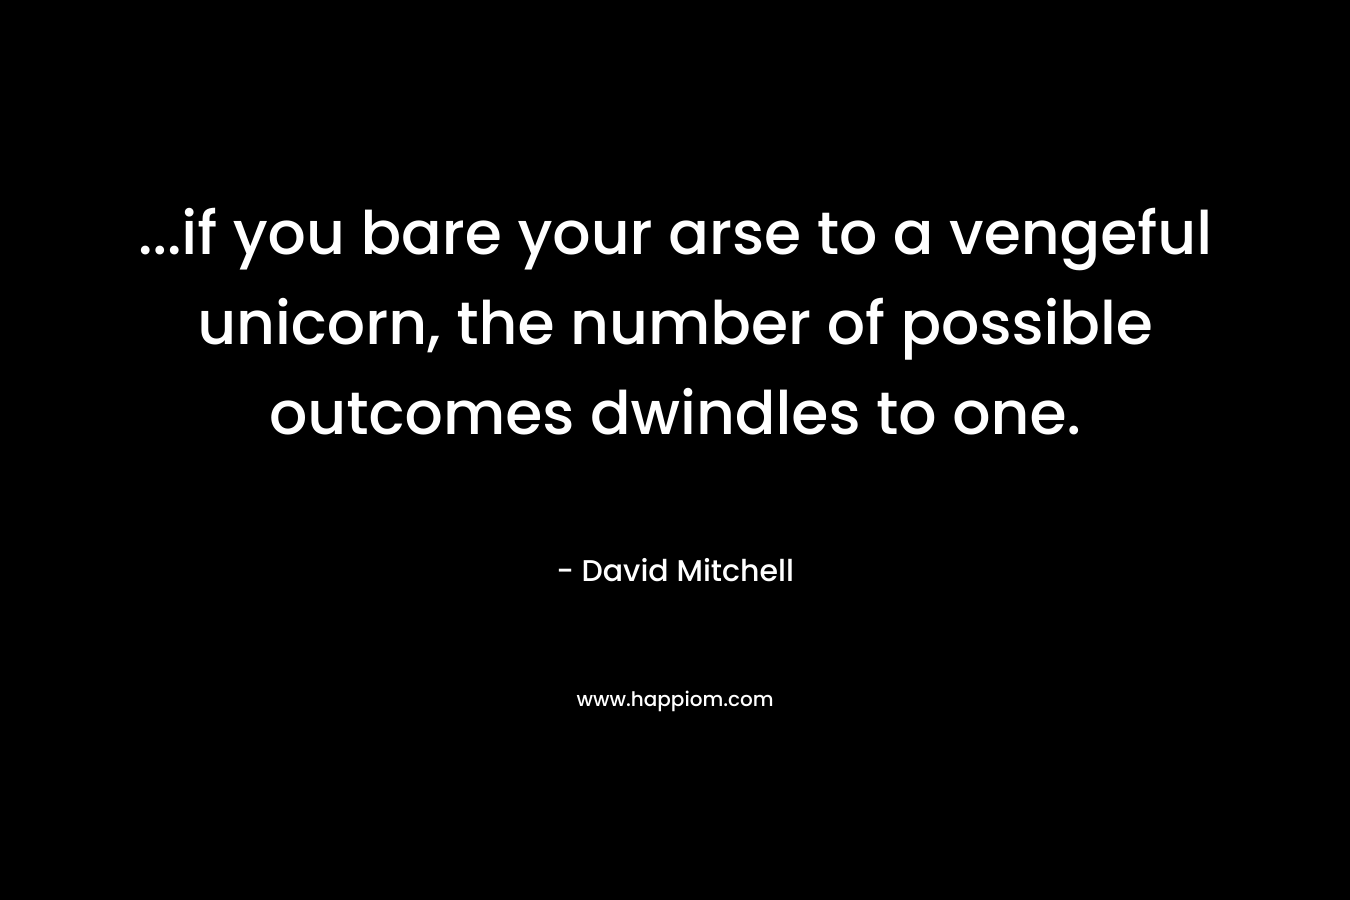 …if you bare your arse to a vengeful unicorn, the number of possible outcomes dwindles to one. – David Mitchell